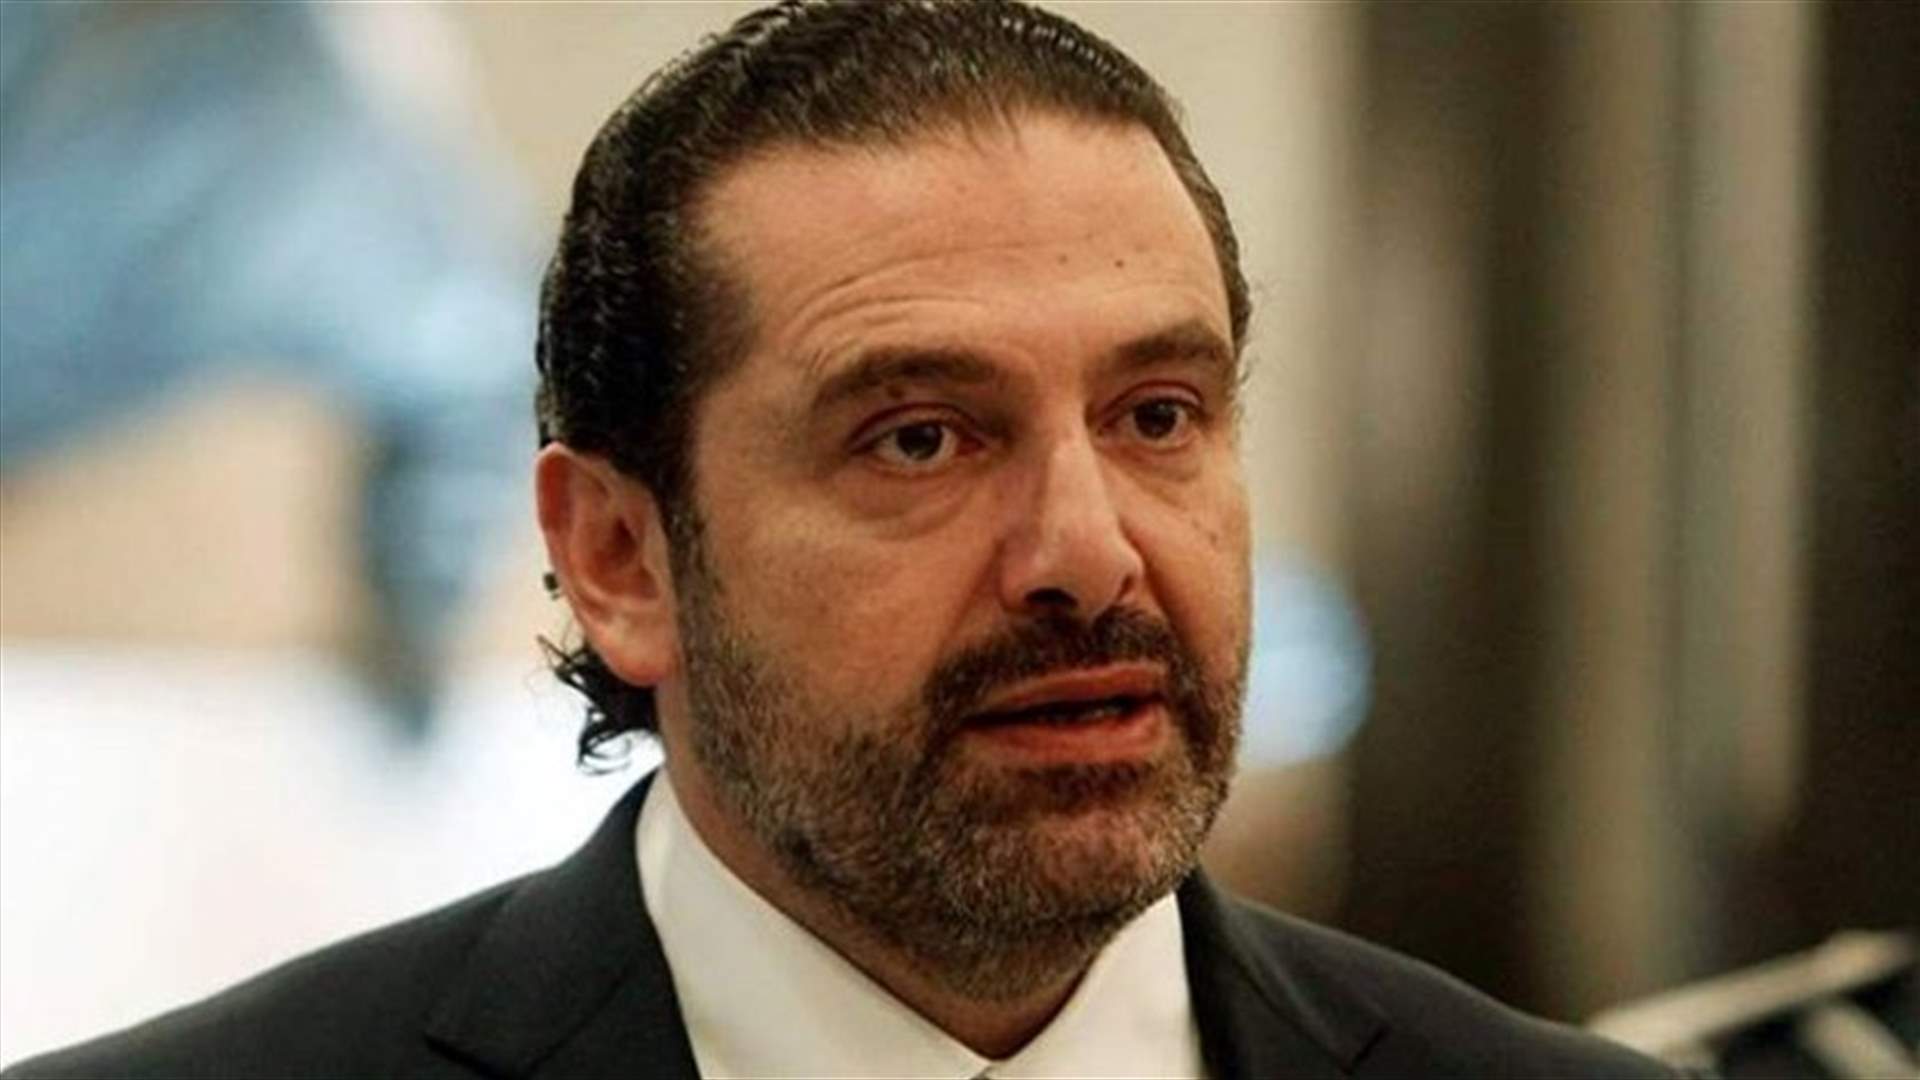 PM Hariri: Cabinet, Parliament and all of Lebanon stand against “the deal of the century”